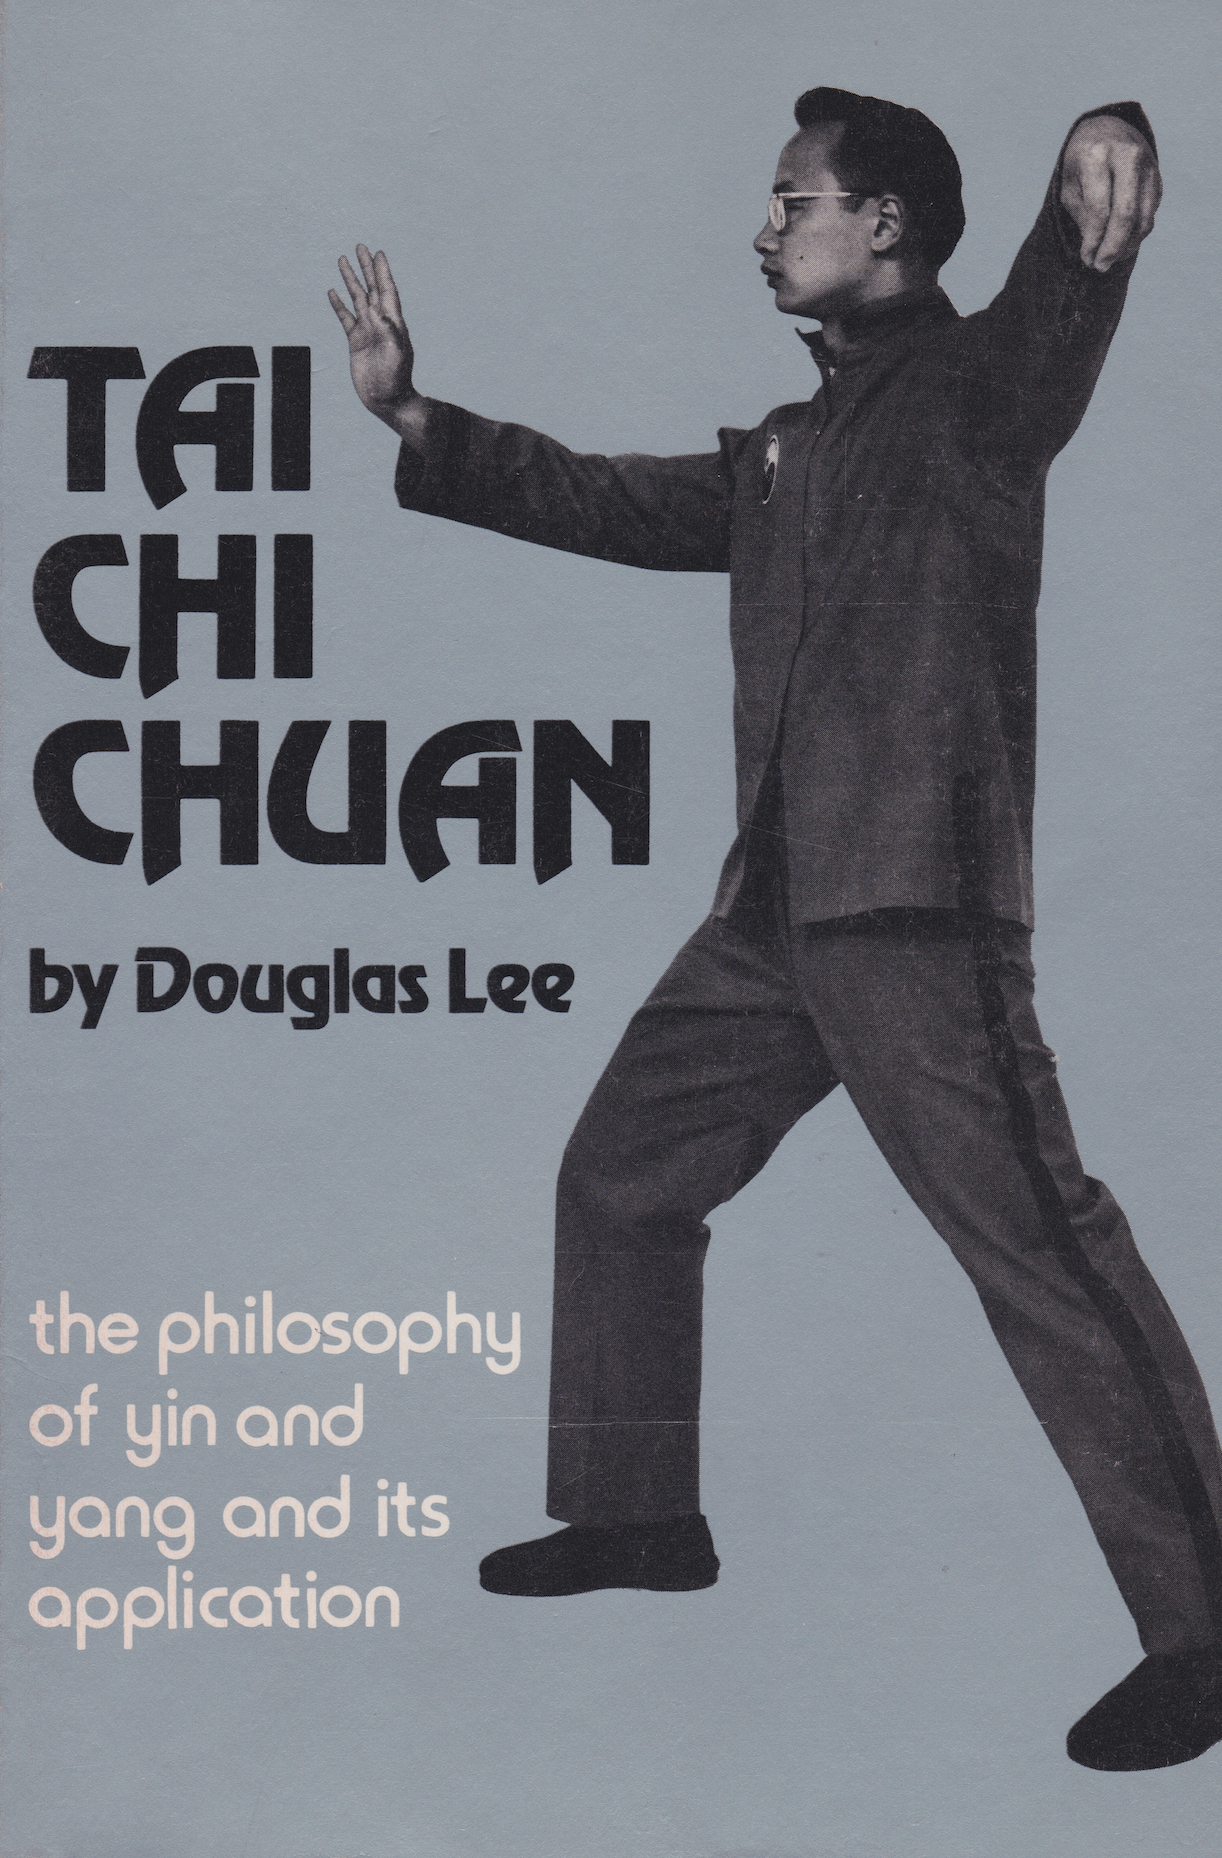 Tai Chi Chuan: The Philosophy of Yin and Yang and Its Application Book by Douglas Lee (Preowned) - Budovideos Inc